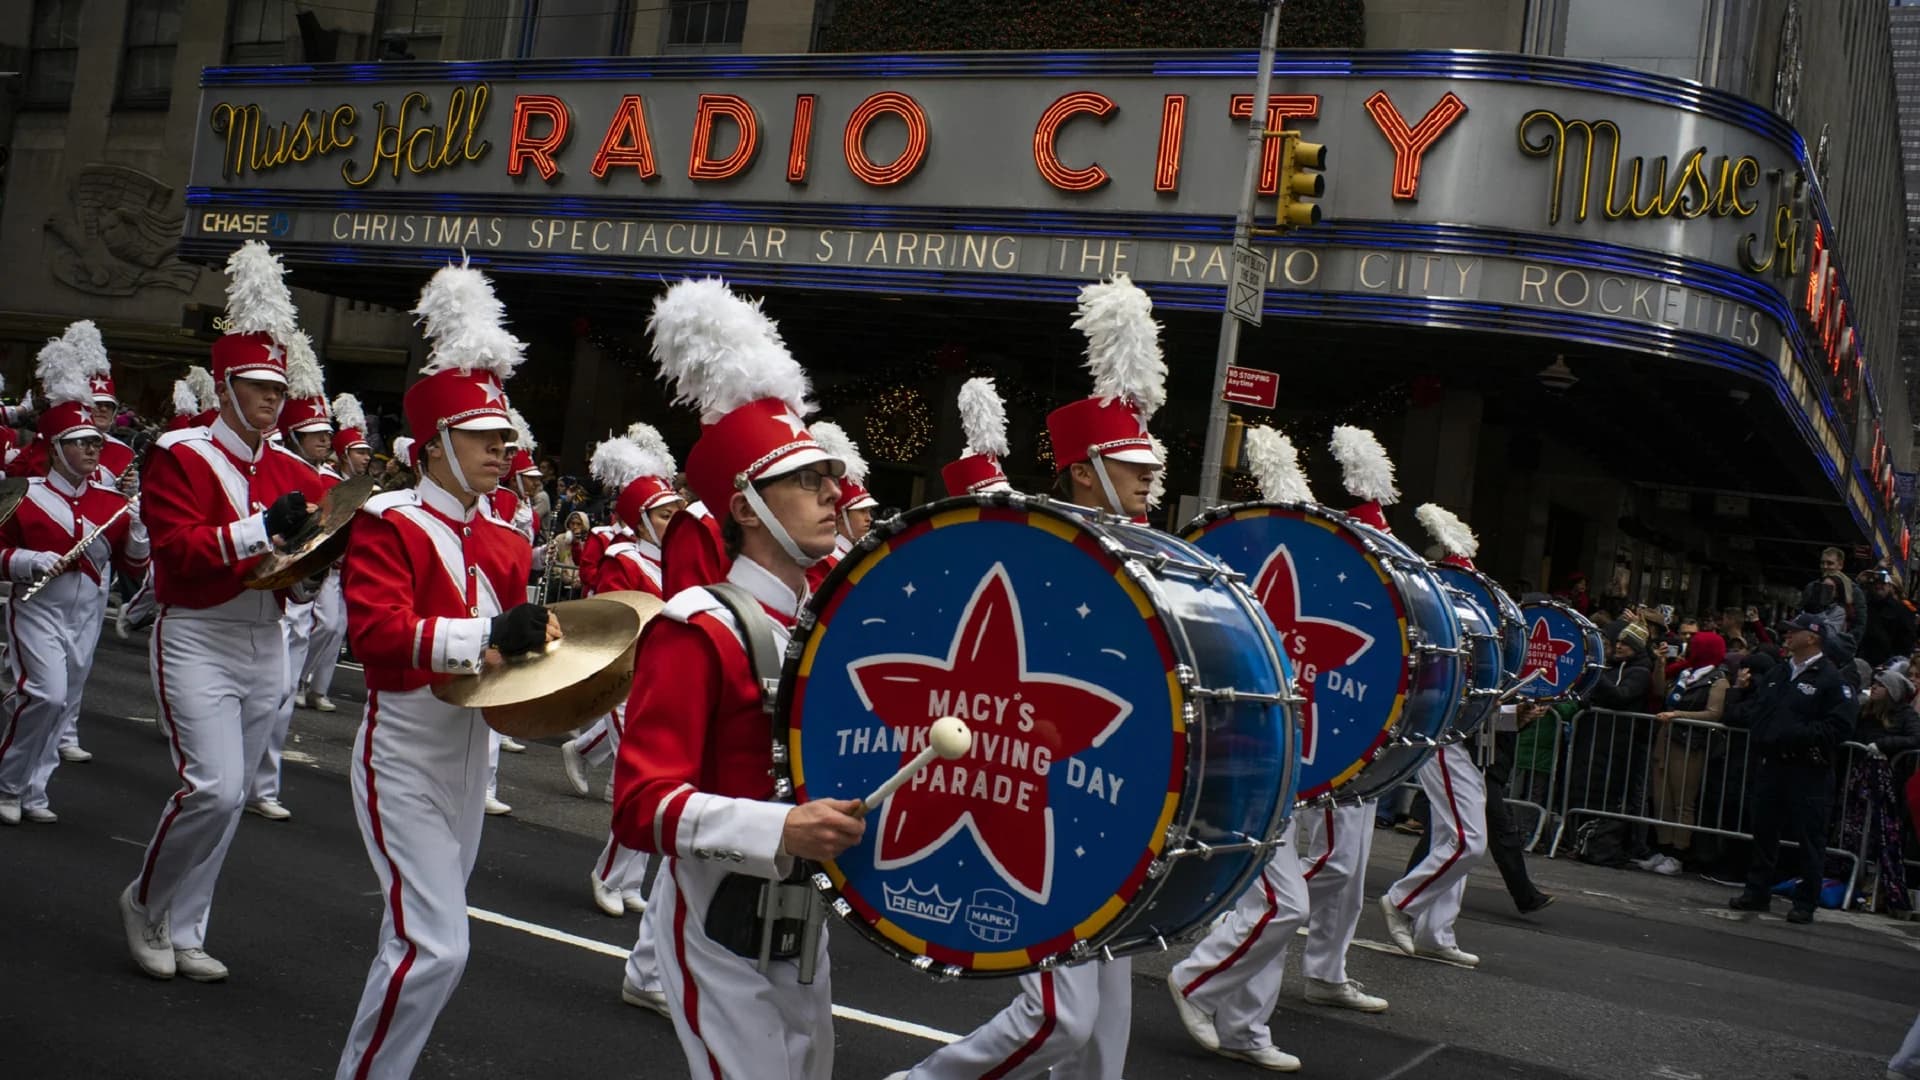 Macy’s Thanksgiving Day Parade returns to pre-pandemic form this year